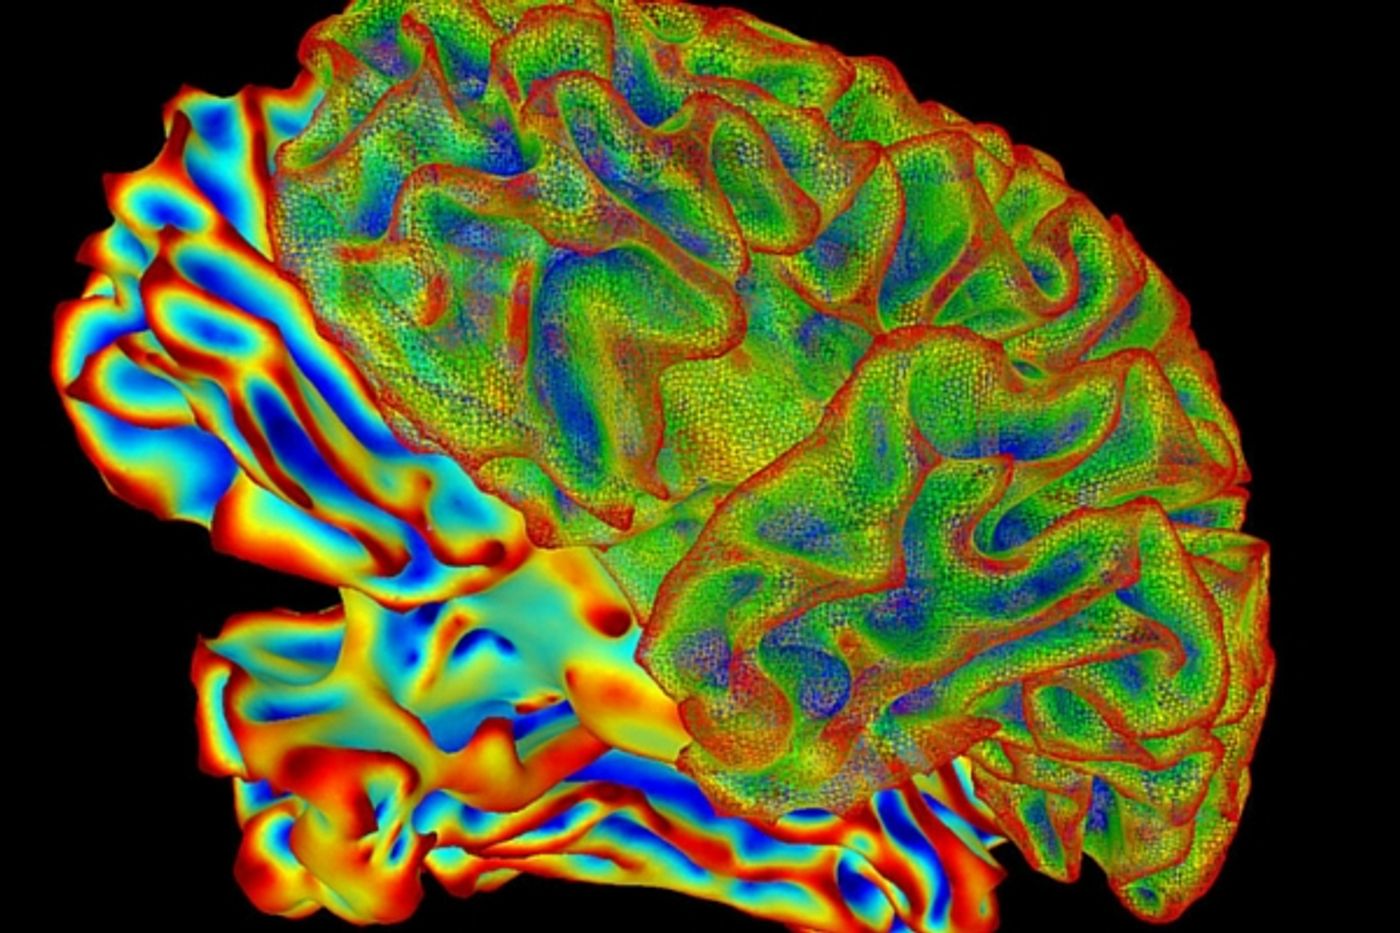 High powered MRIs and holographic technology is what's new in brain imaging